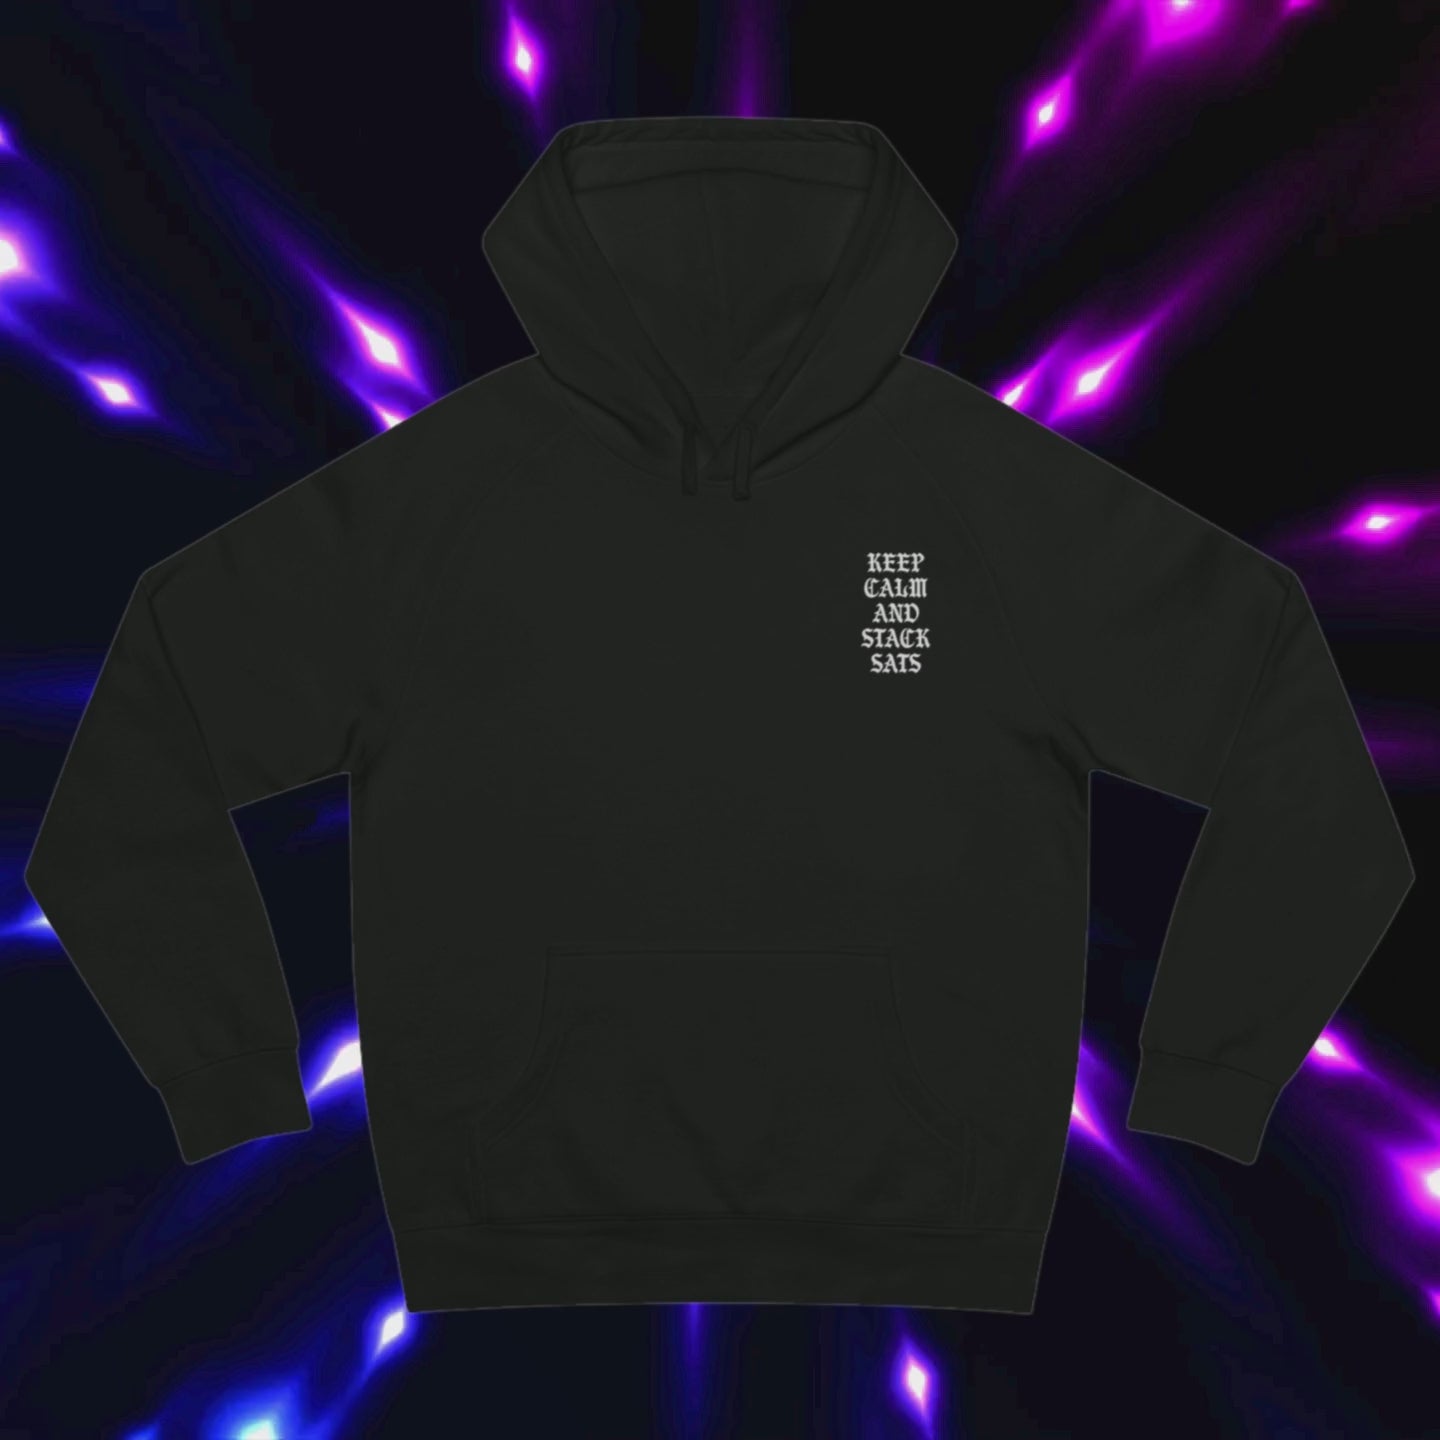 Bitcoin Apparel - Keep Calm And Stack Sats Hoodie (Gothic Style) video. Available at NEONCRYPTO STORE. 